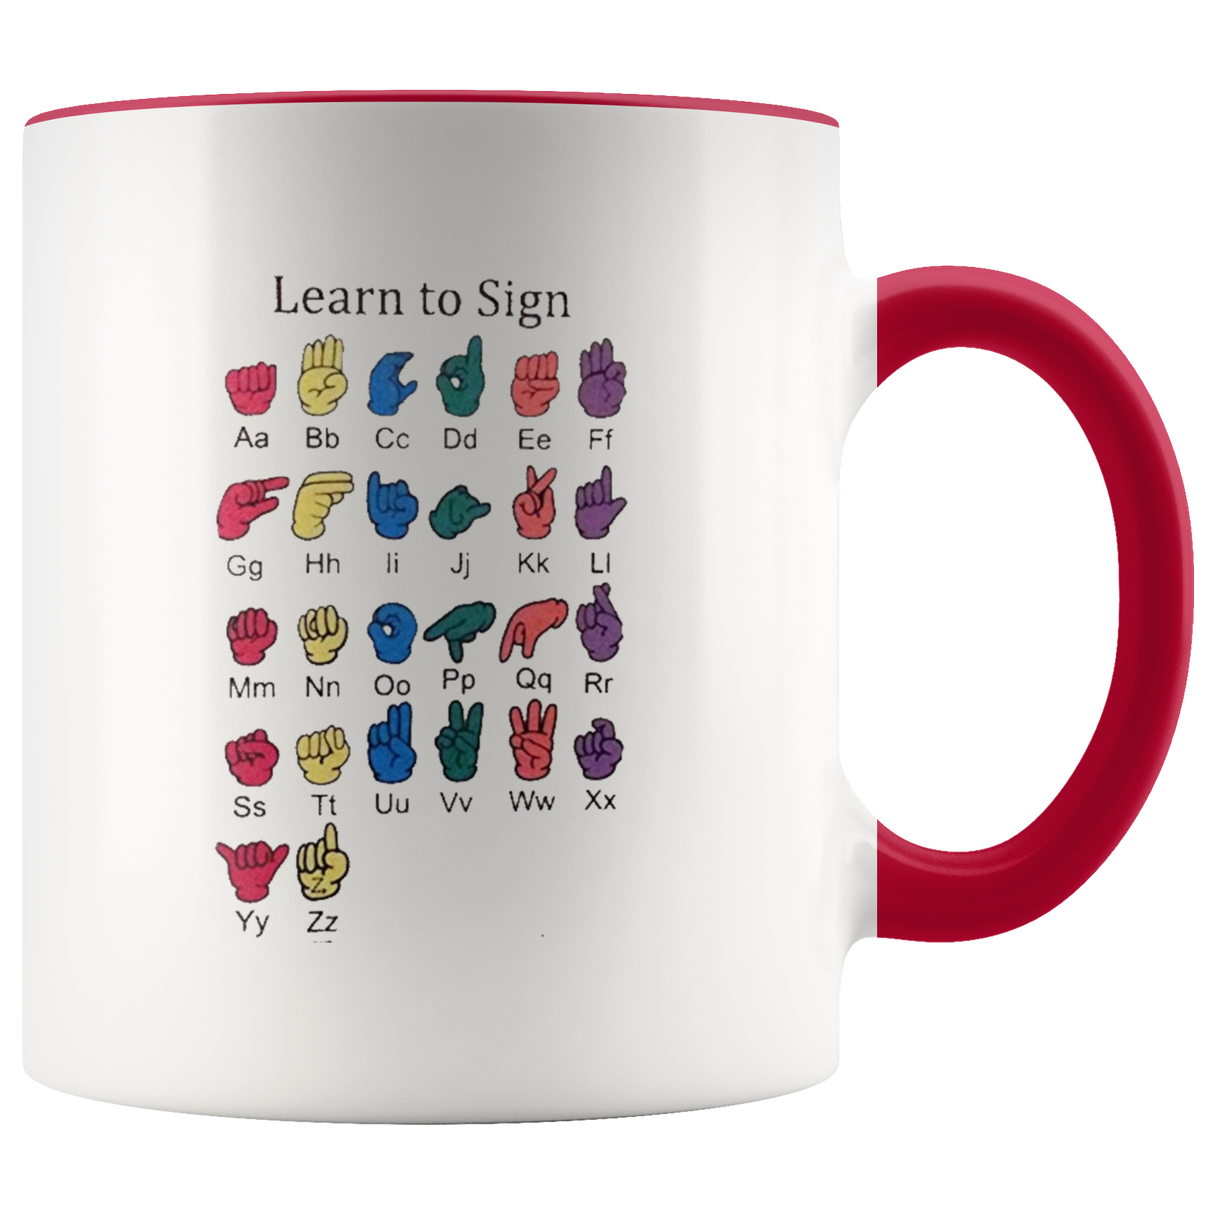 Learn ASL Ceramic Accent Mug - Red | Shop Sassy Chick